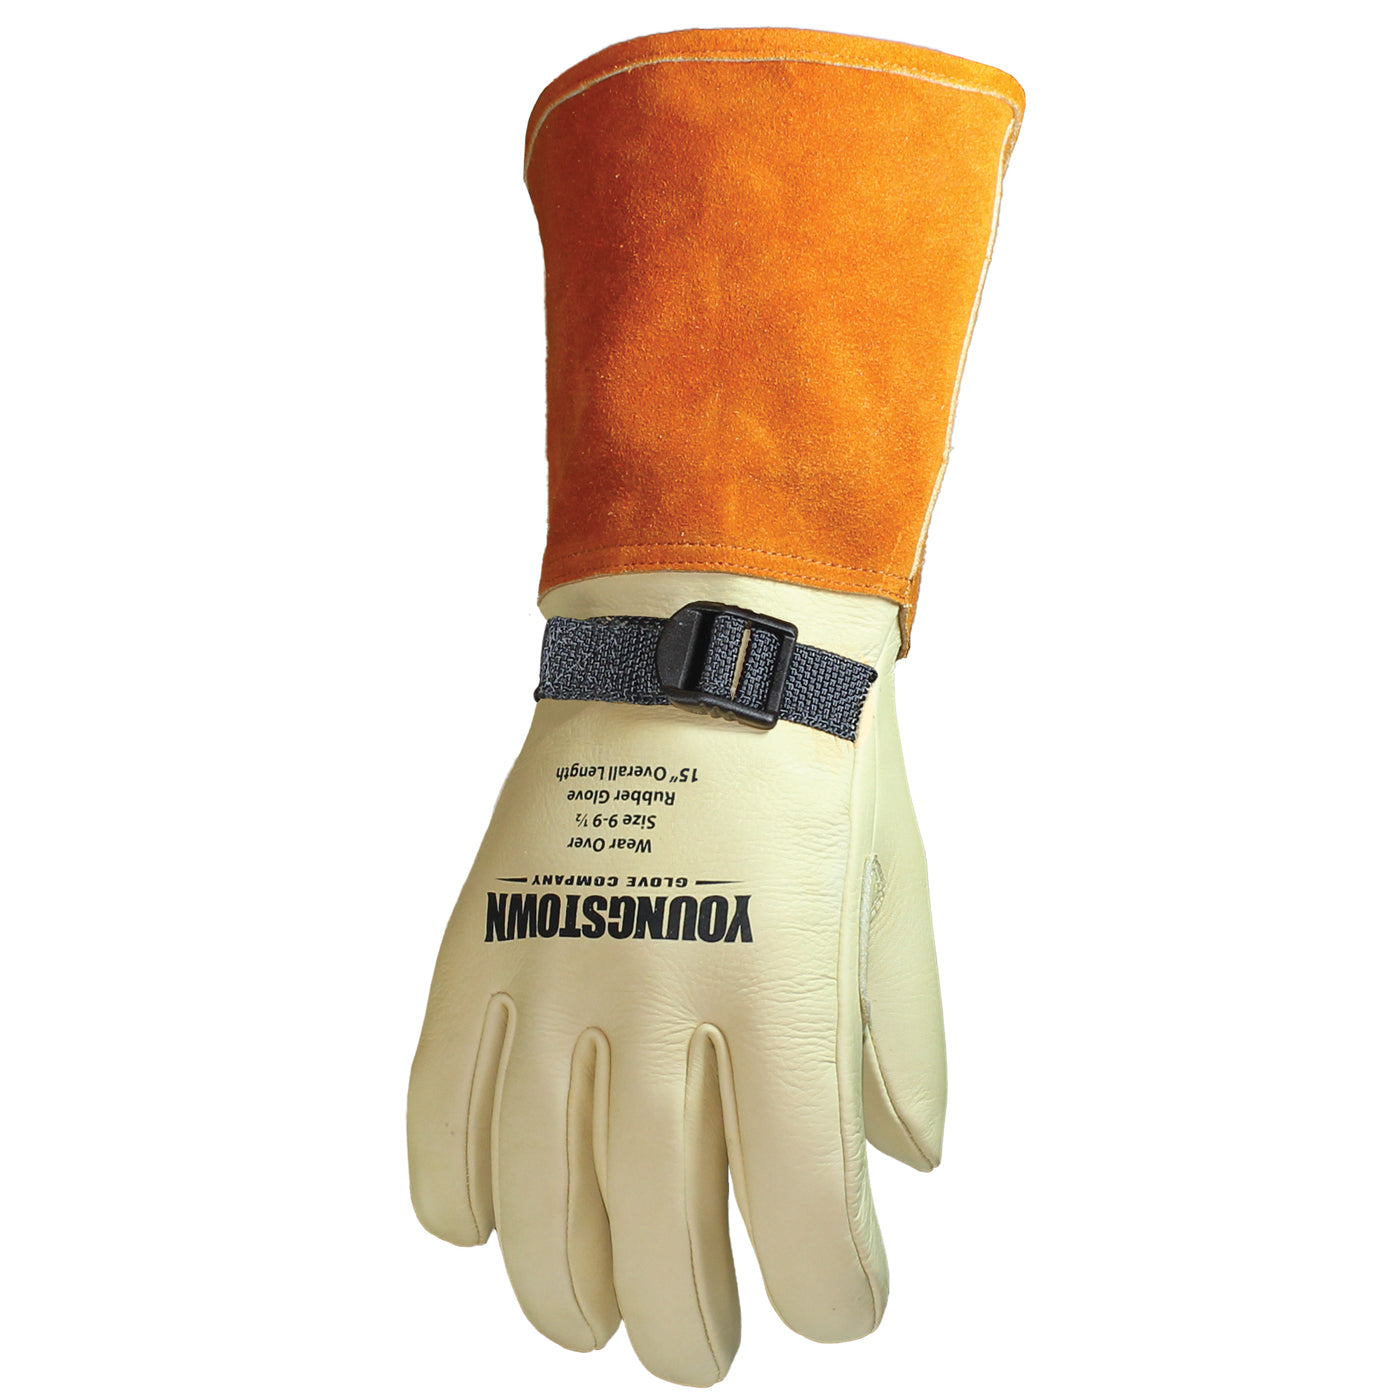 16-5100-15 Youngstown 15" Primary Leather Protector Glove - Main image